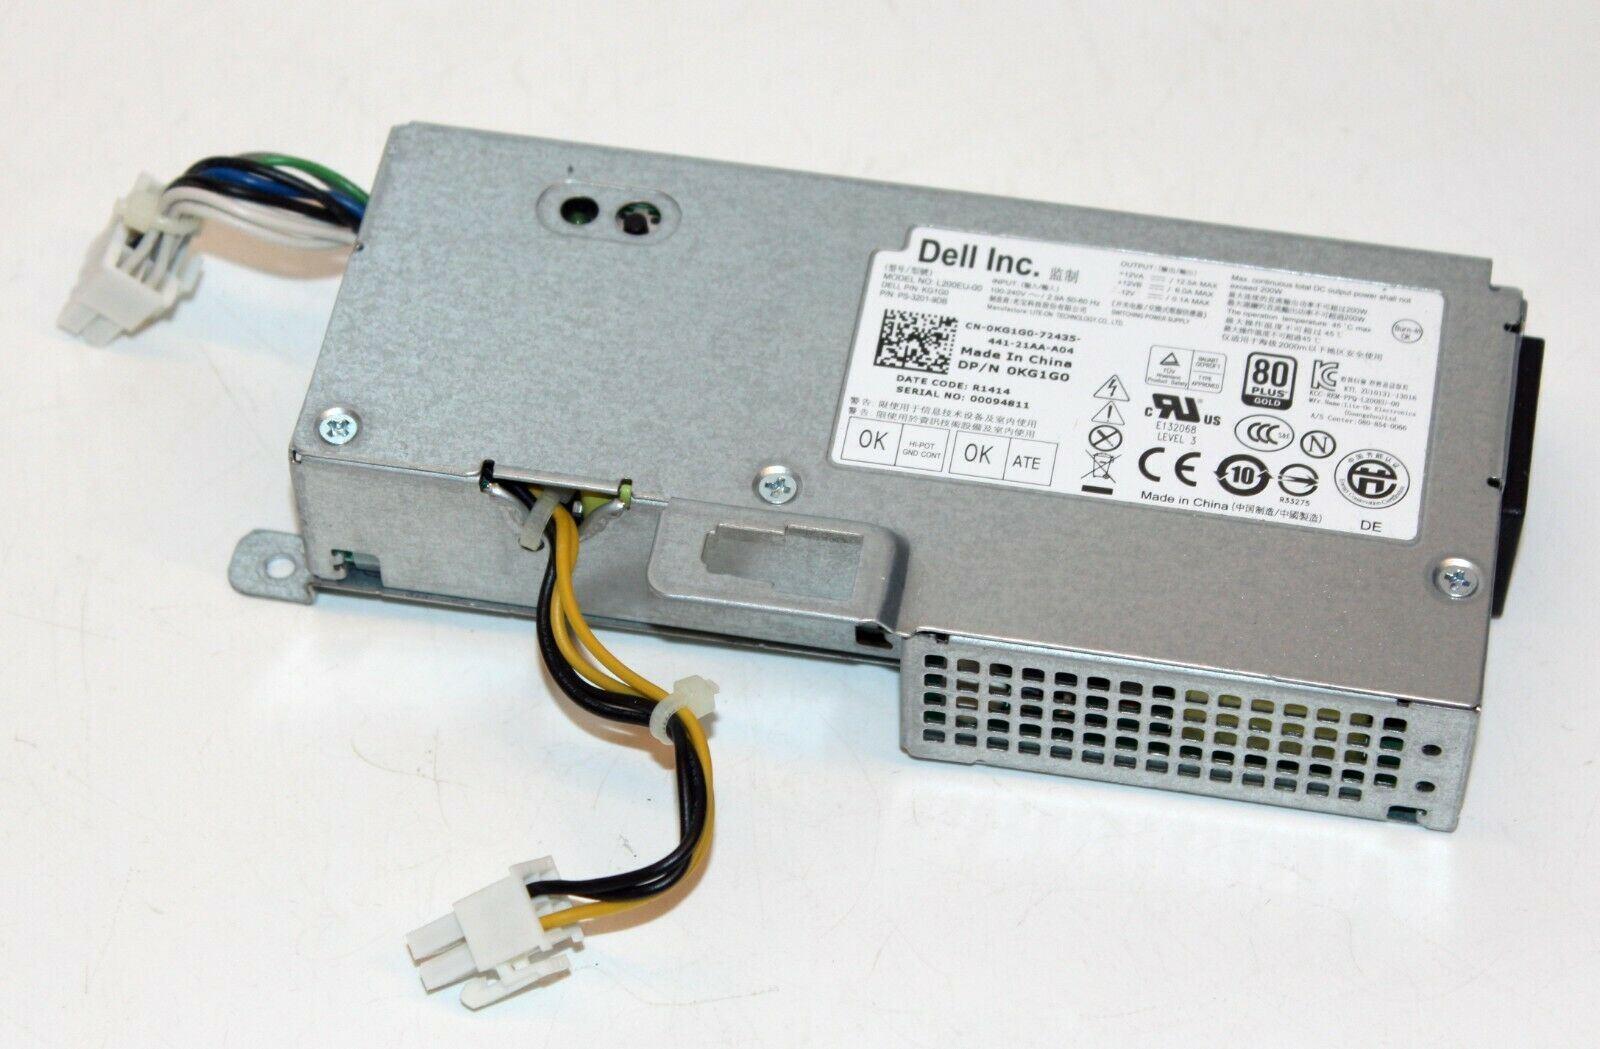 L200EU 00 0KG1G0 PS 3201 9DB 01VCY4 PS 3201 9DA kg1g0 dell kg1g0 200w power supply for optiplex 780 790 990 7010 9010 usff